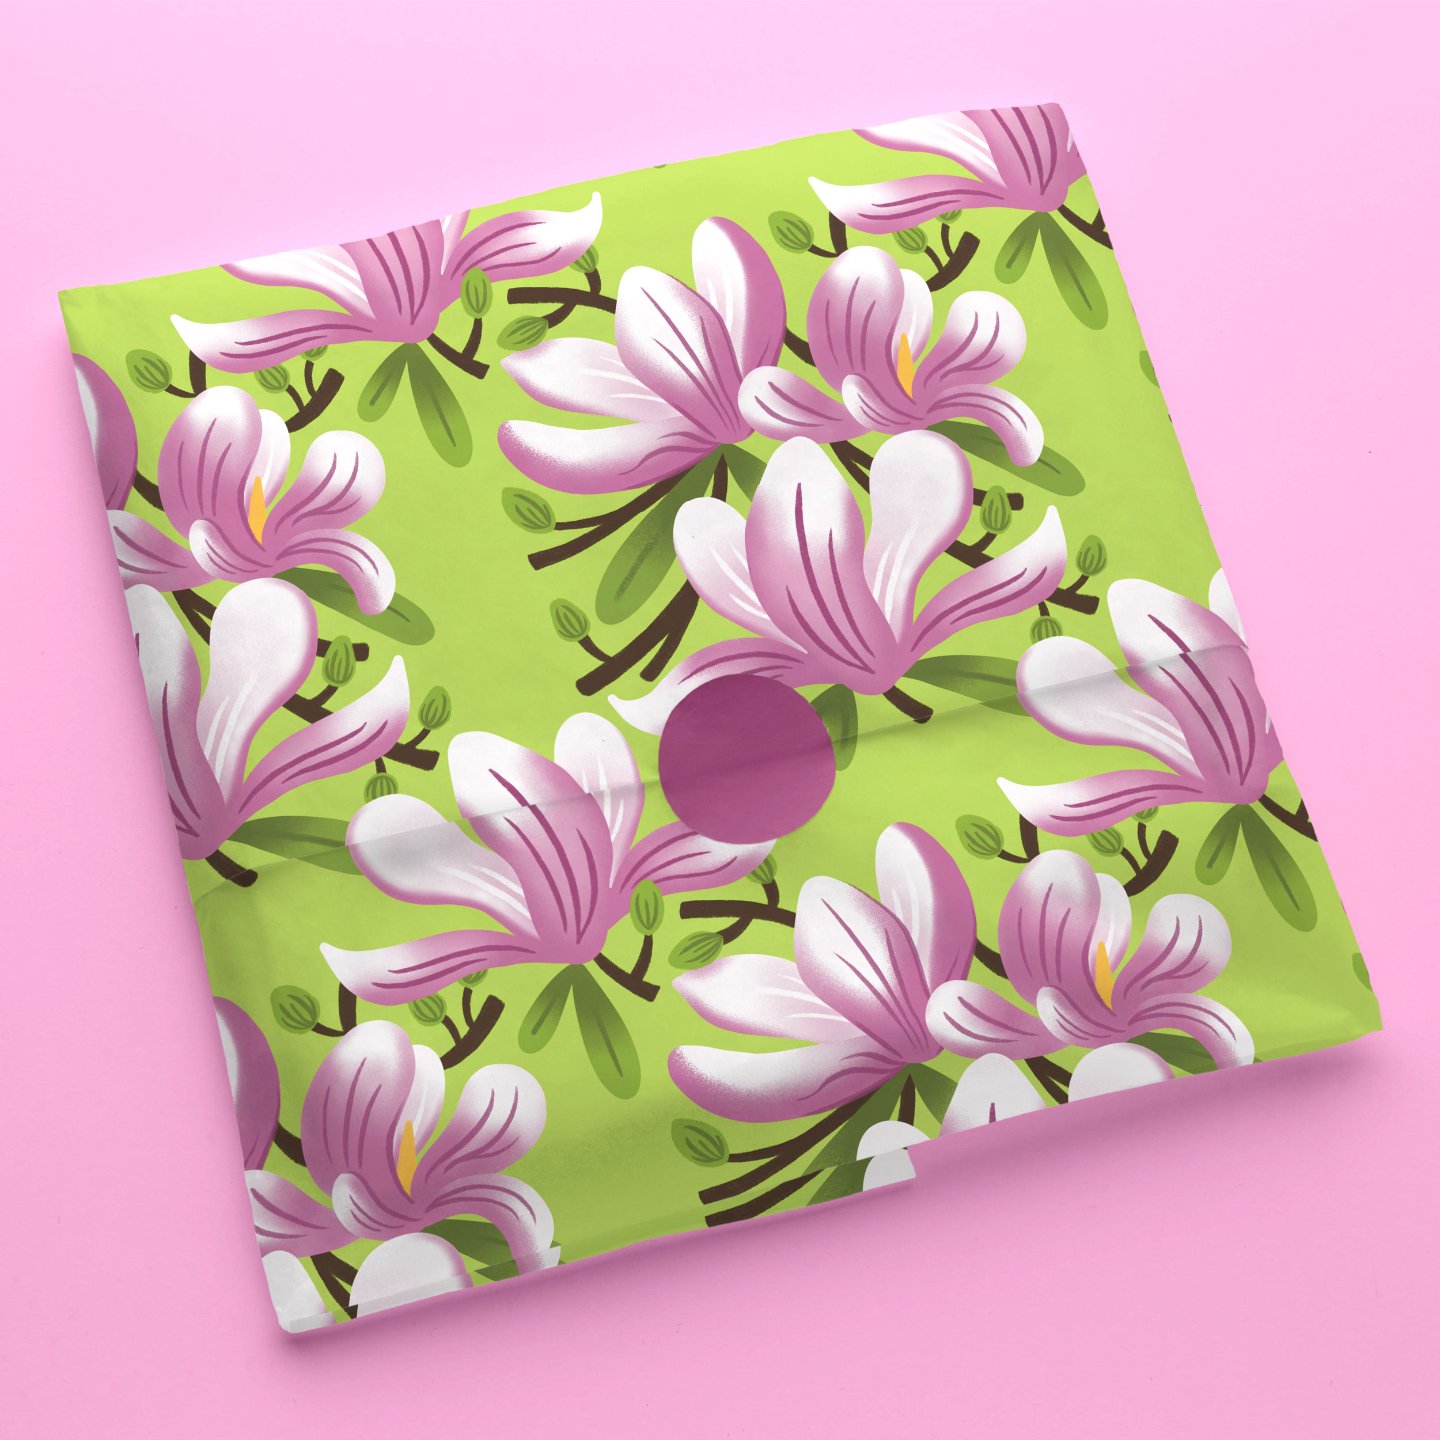 I turned my magnolias from into a pattern, I think it would look great as gift wrap or on fabric! 
.
.
.
.
#mixitupmay24 #surfacepattern #magnolia #floralpattern #artlicensingdesign